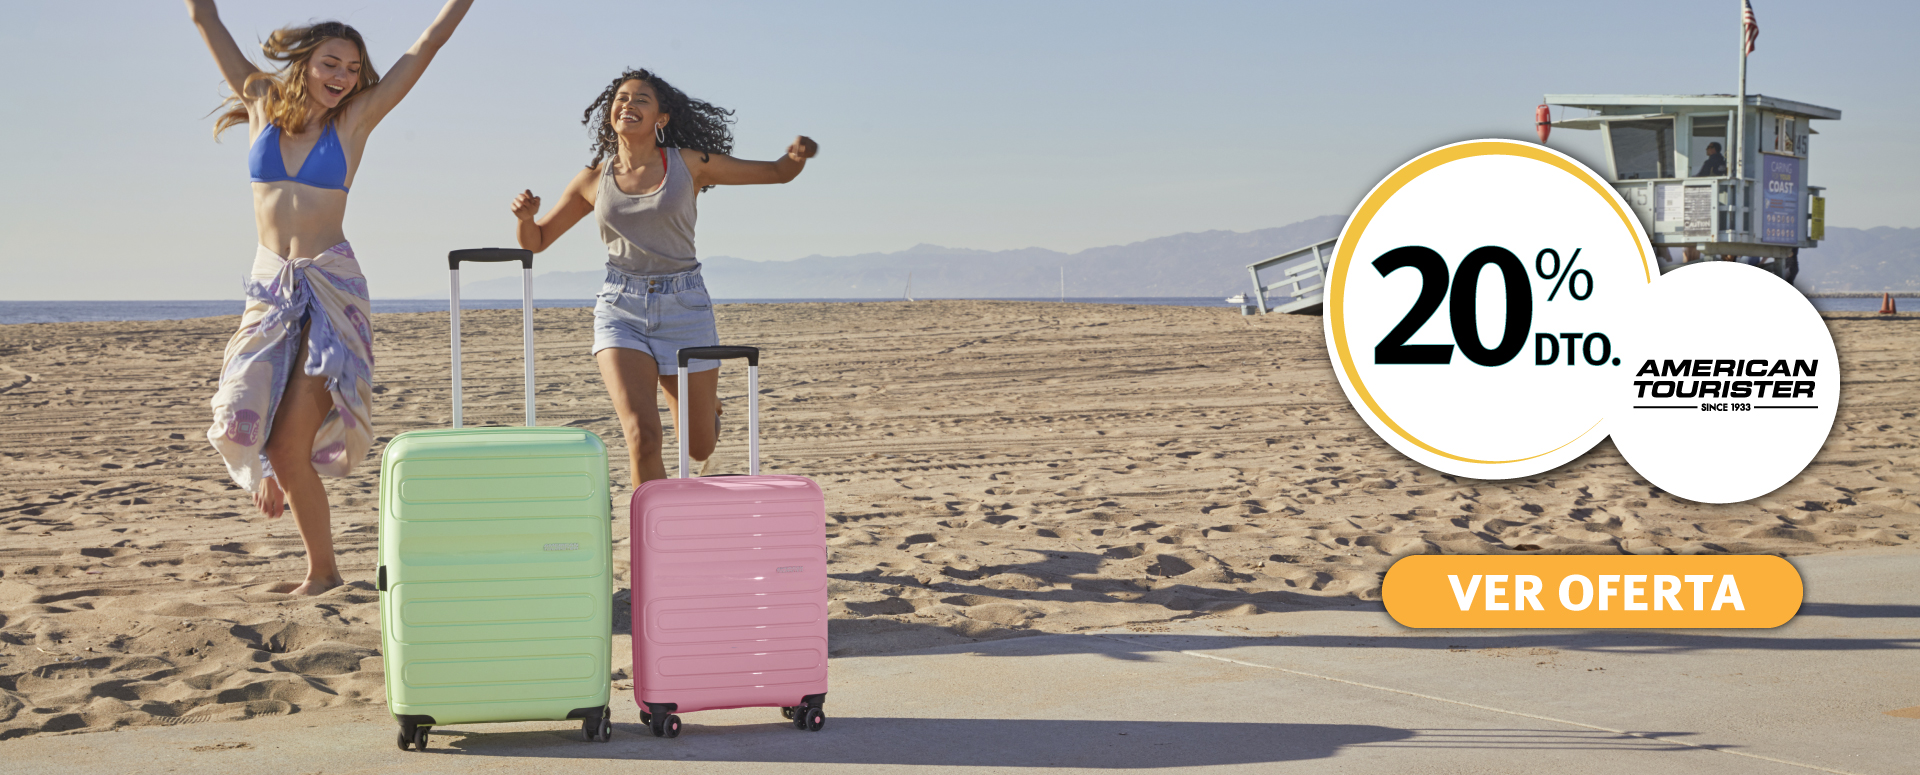 American Tourister descuento ISIC